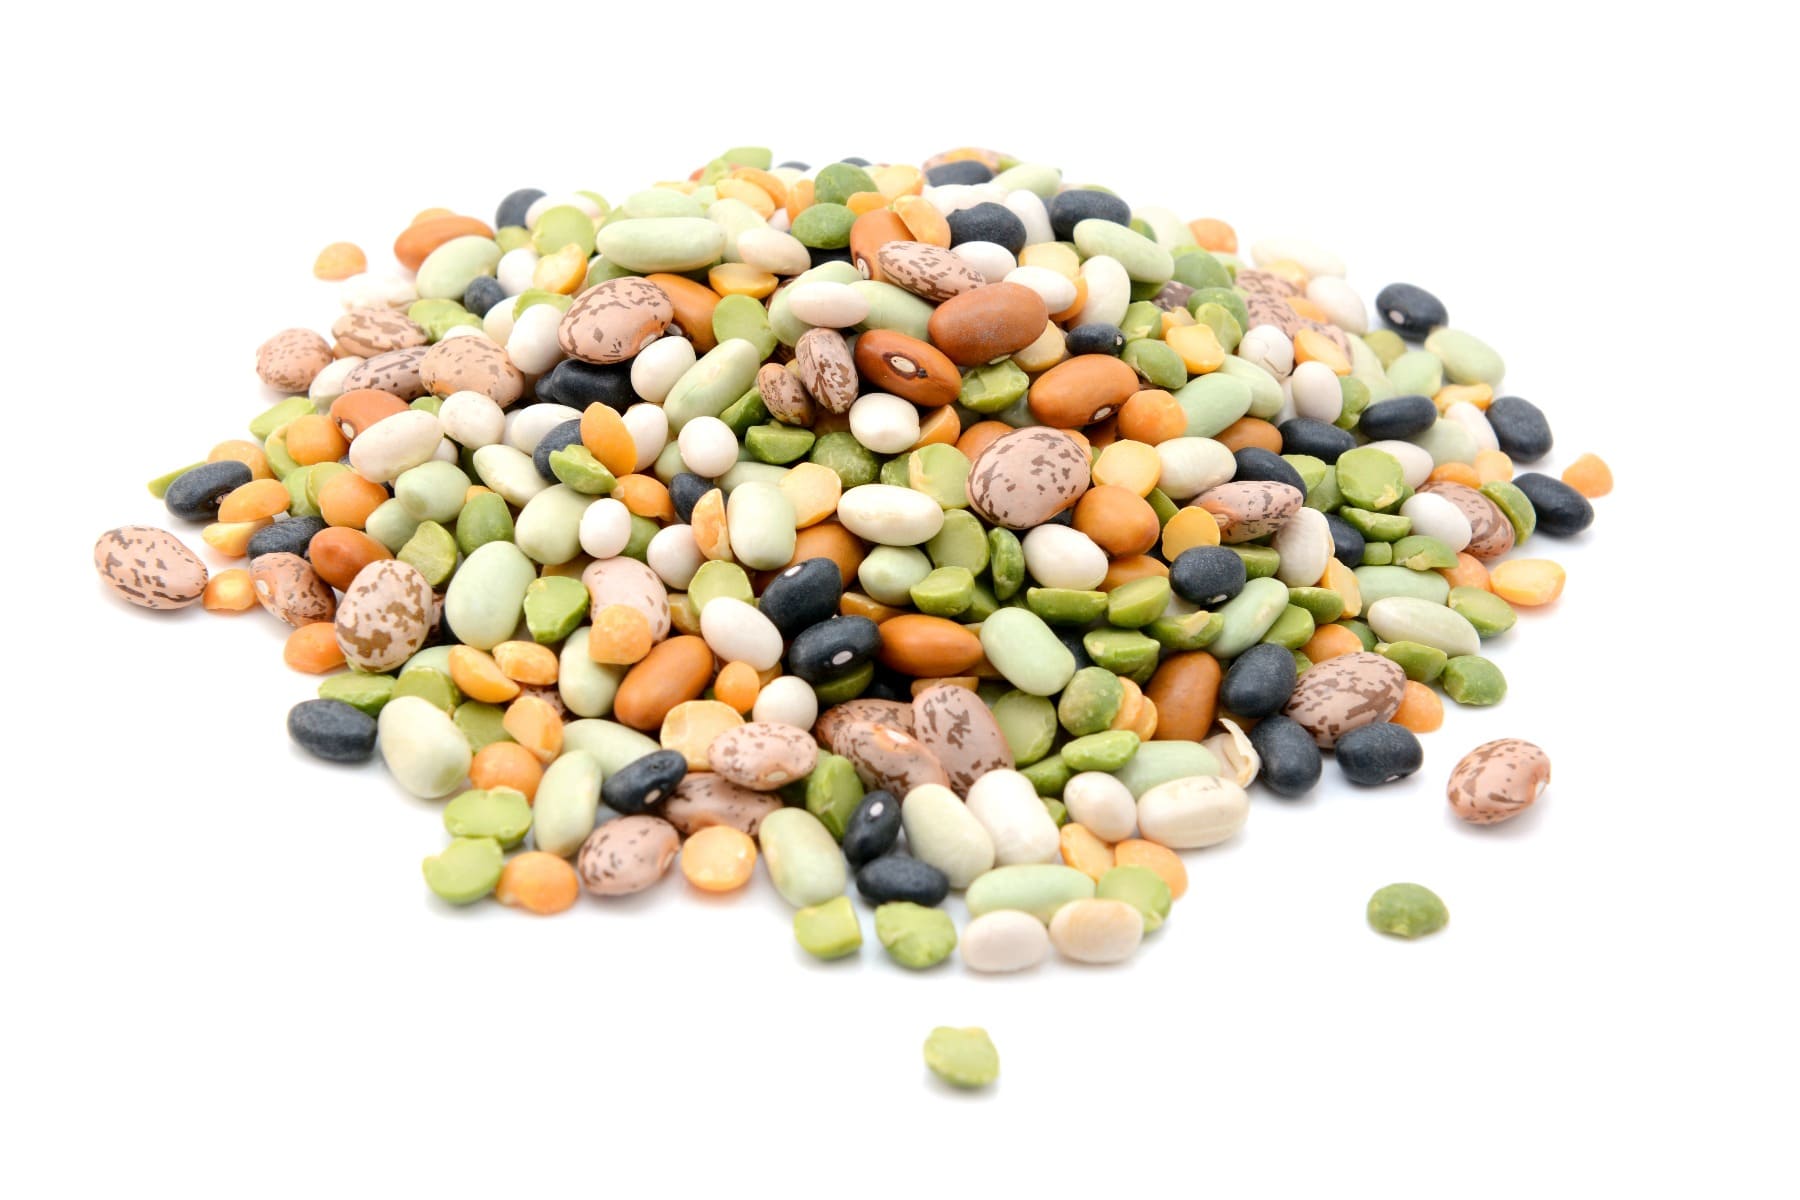 Pulses and beans can be part of a healthy diet